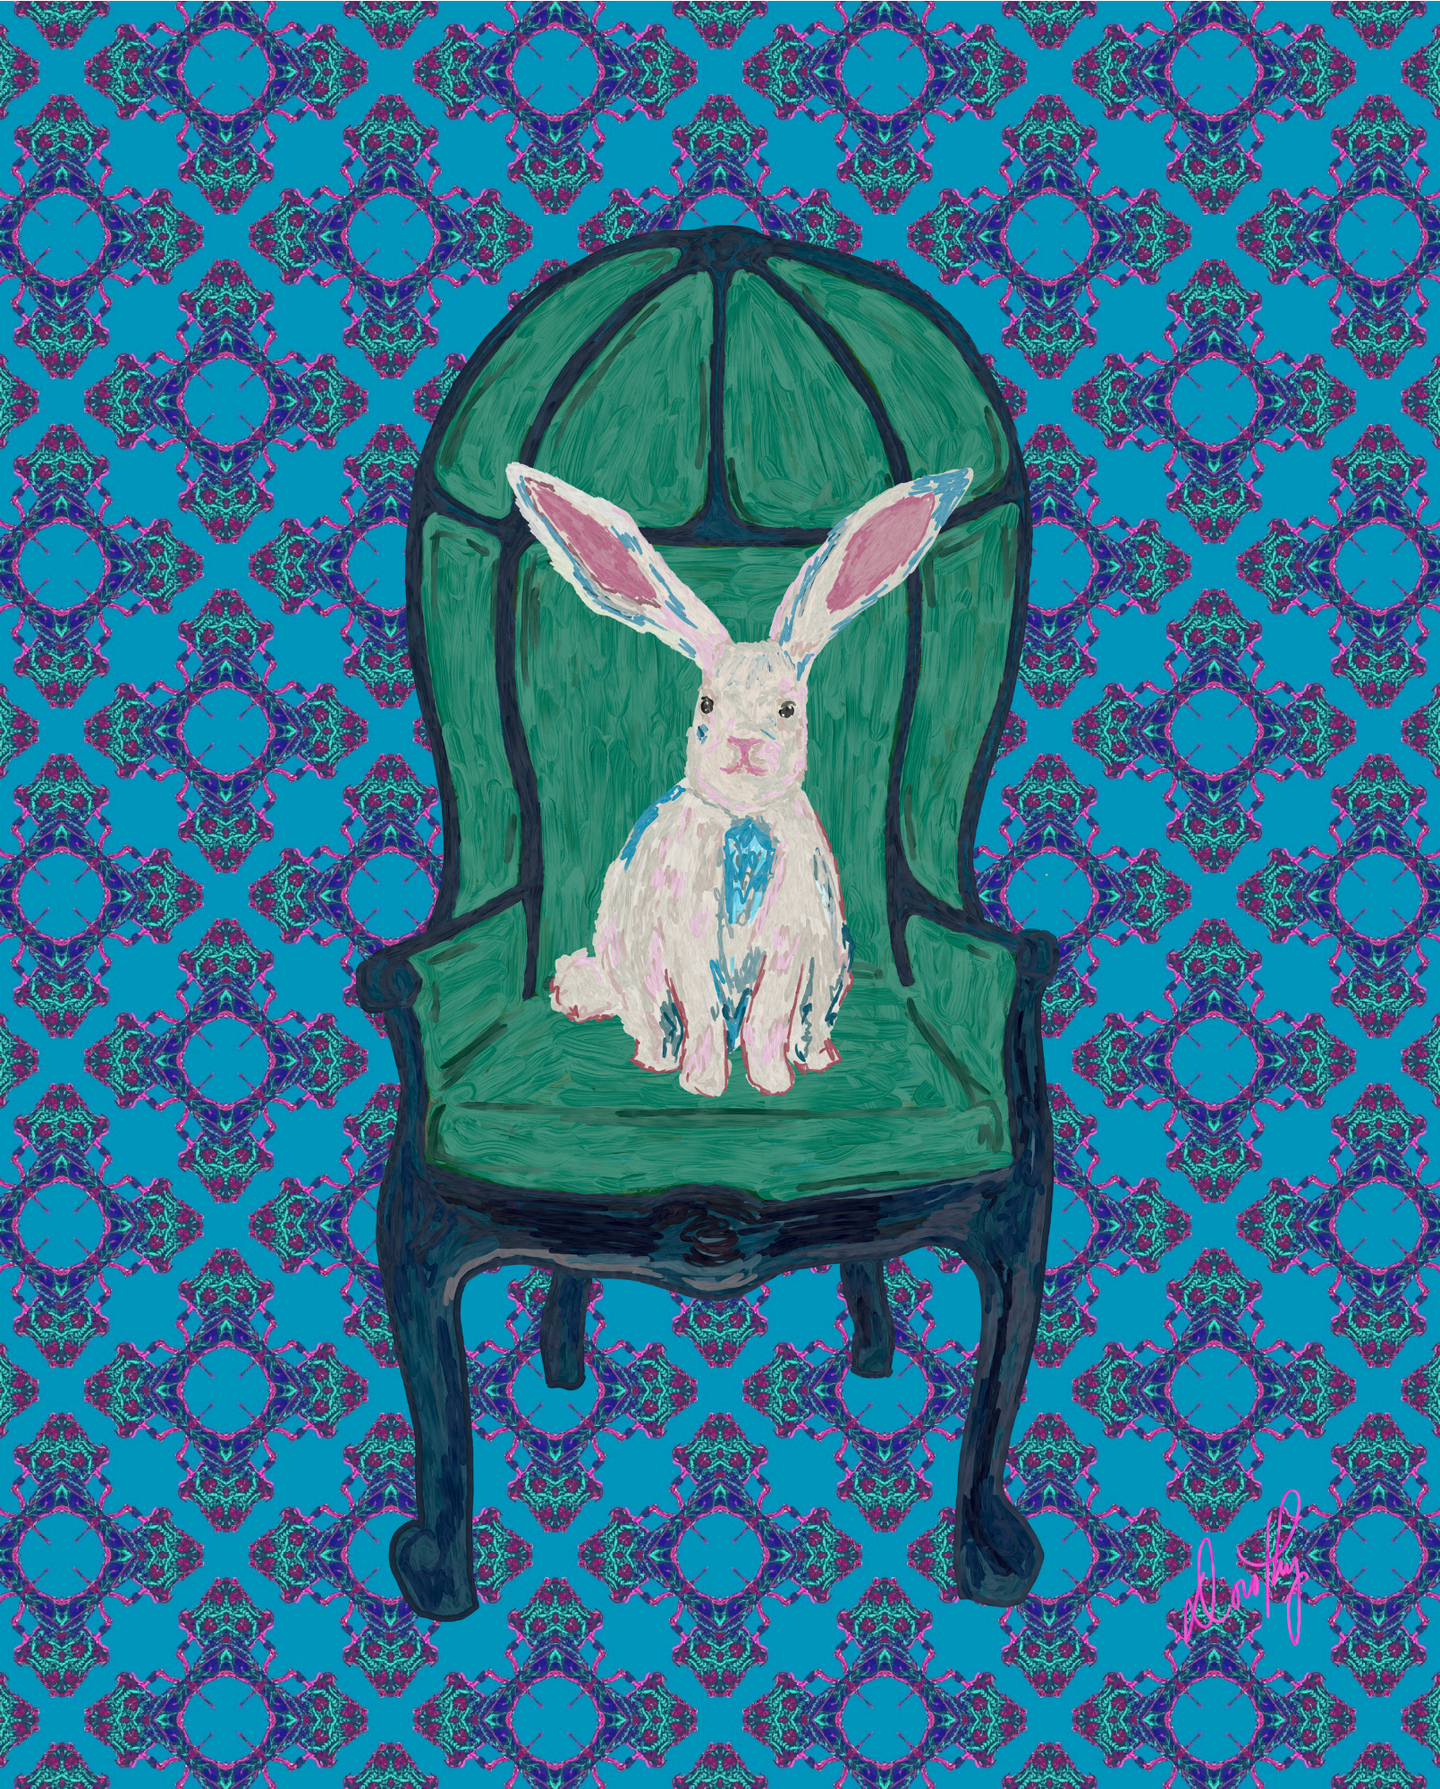 Hare on Chair Art Print - various backgrounds